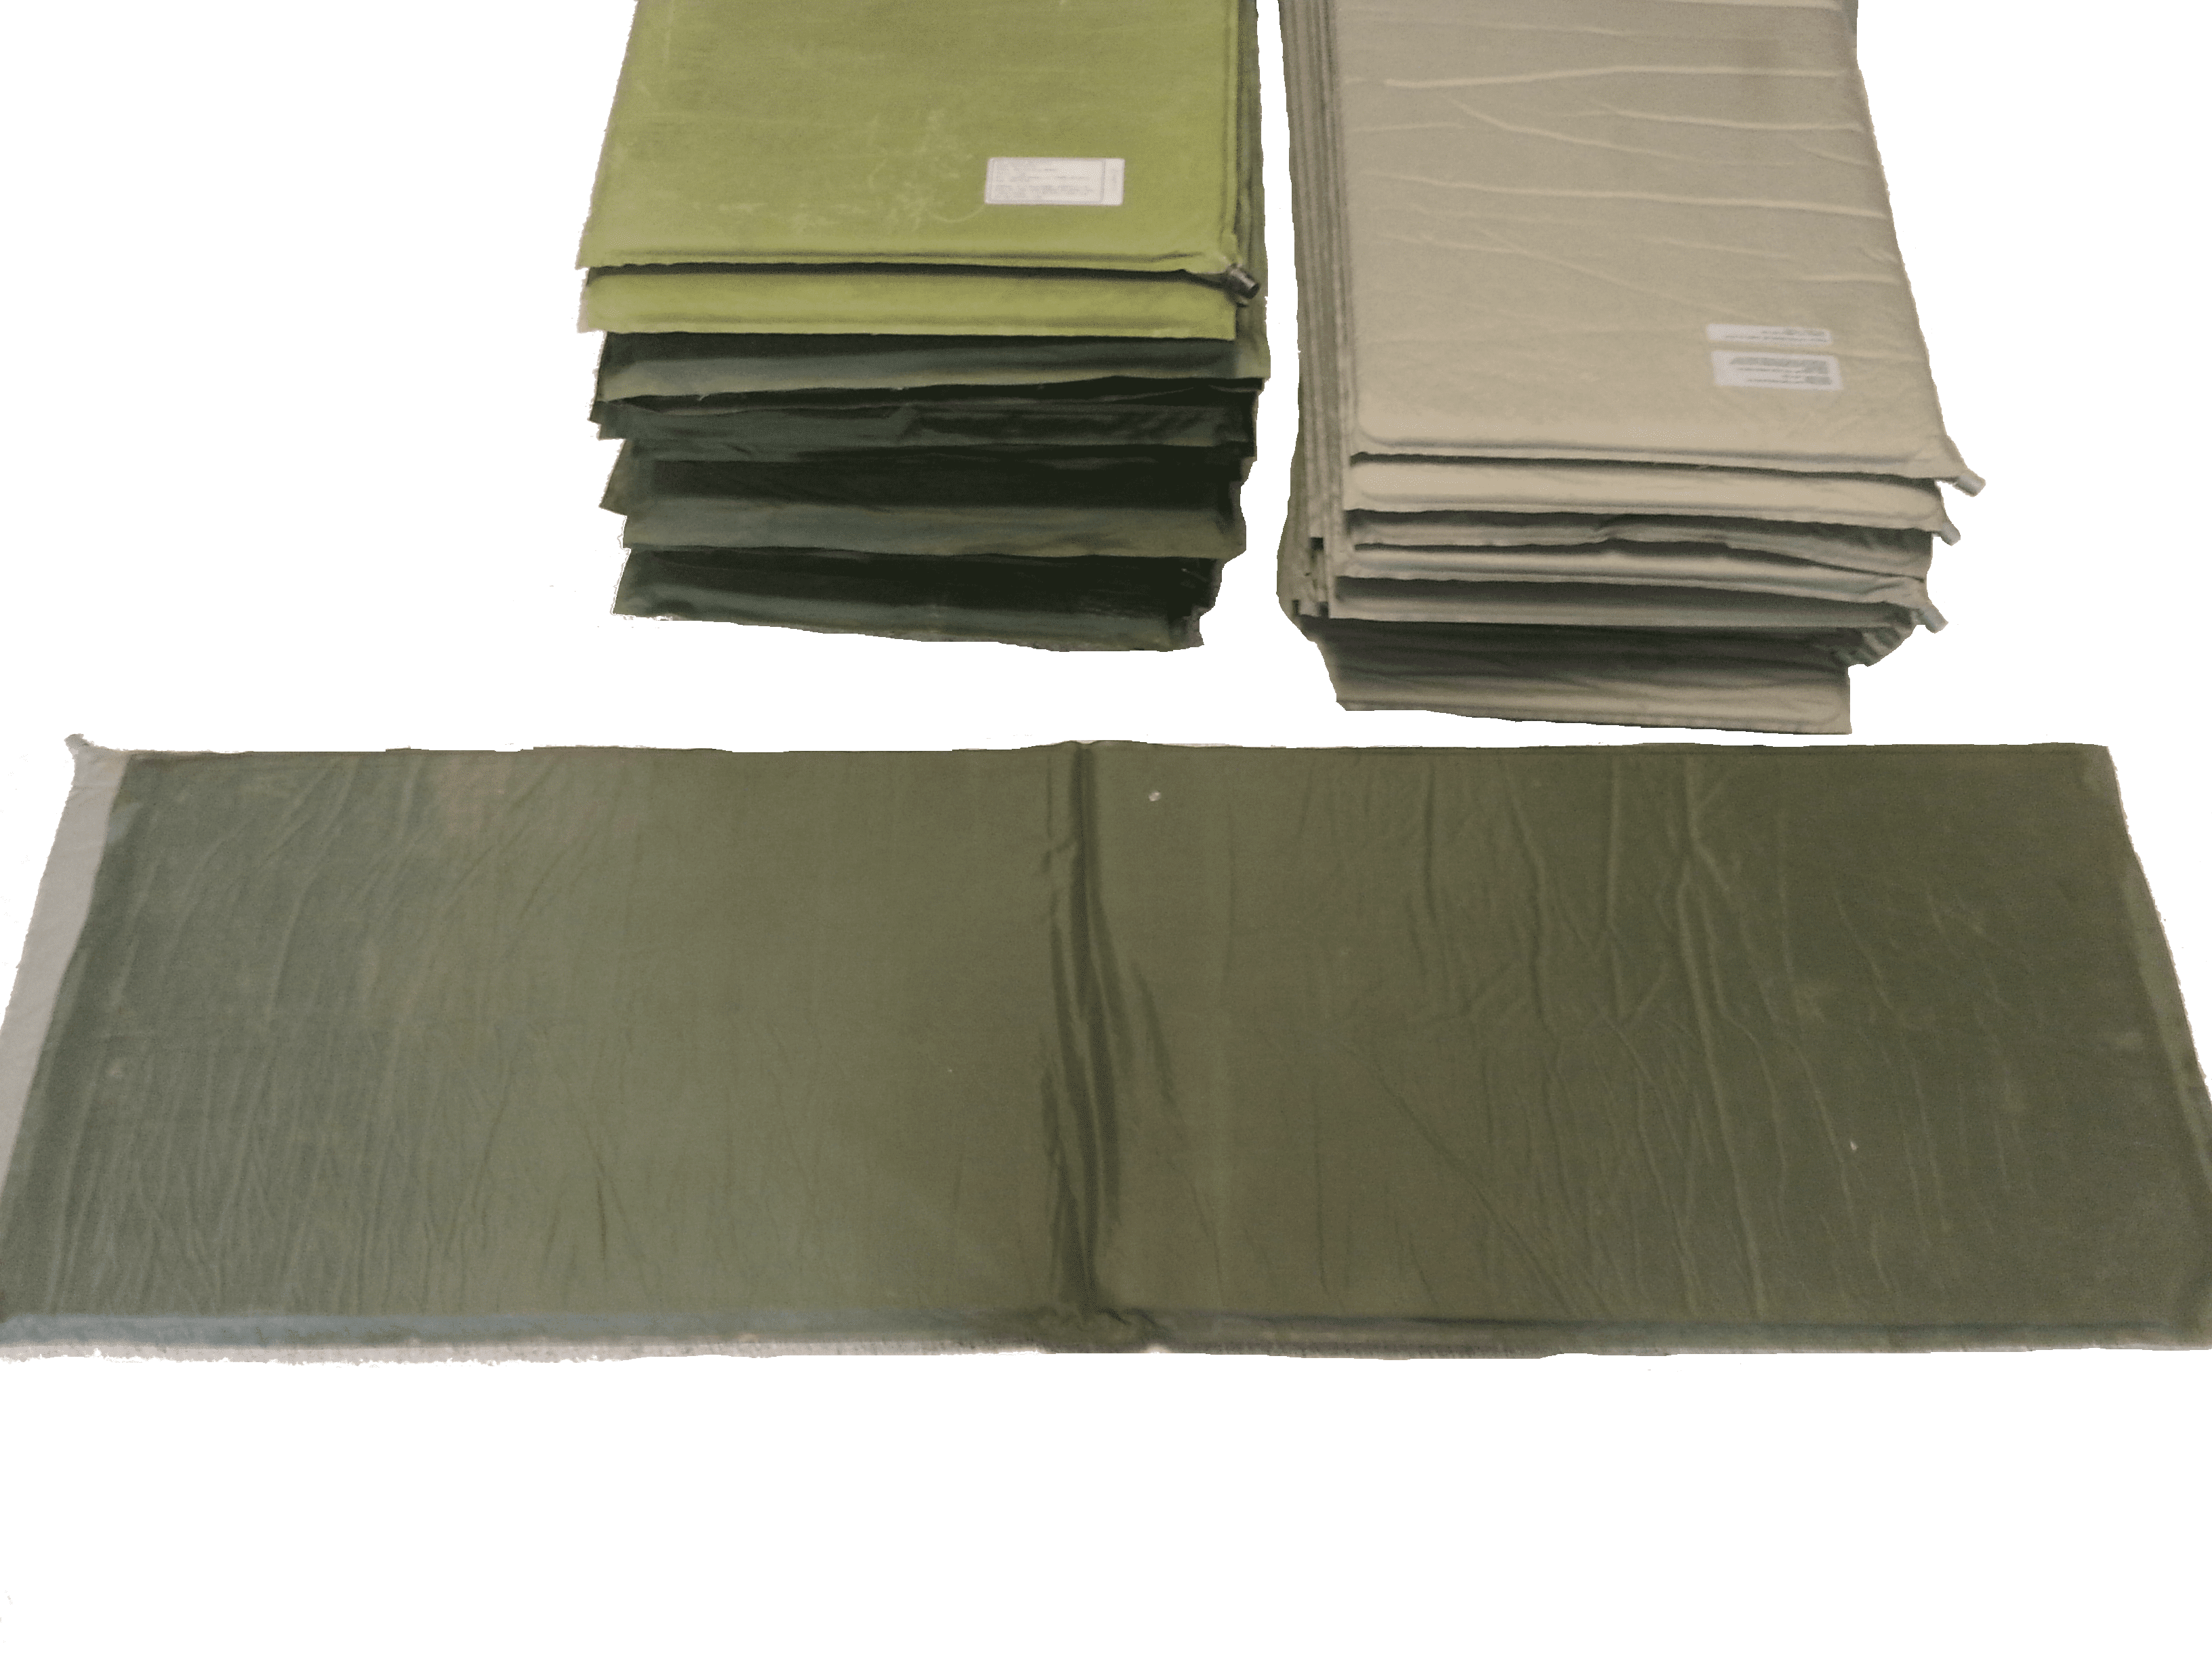 US Military Therm-A-Rest Self-Inflating Sleeping Pad Foliage Sleep Mat VGC 